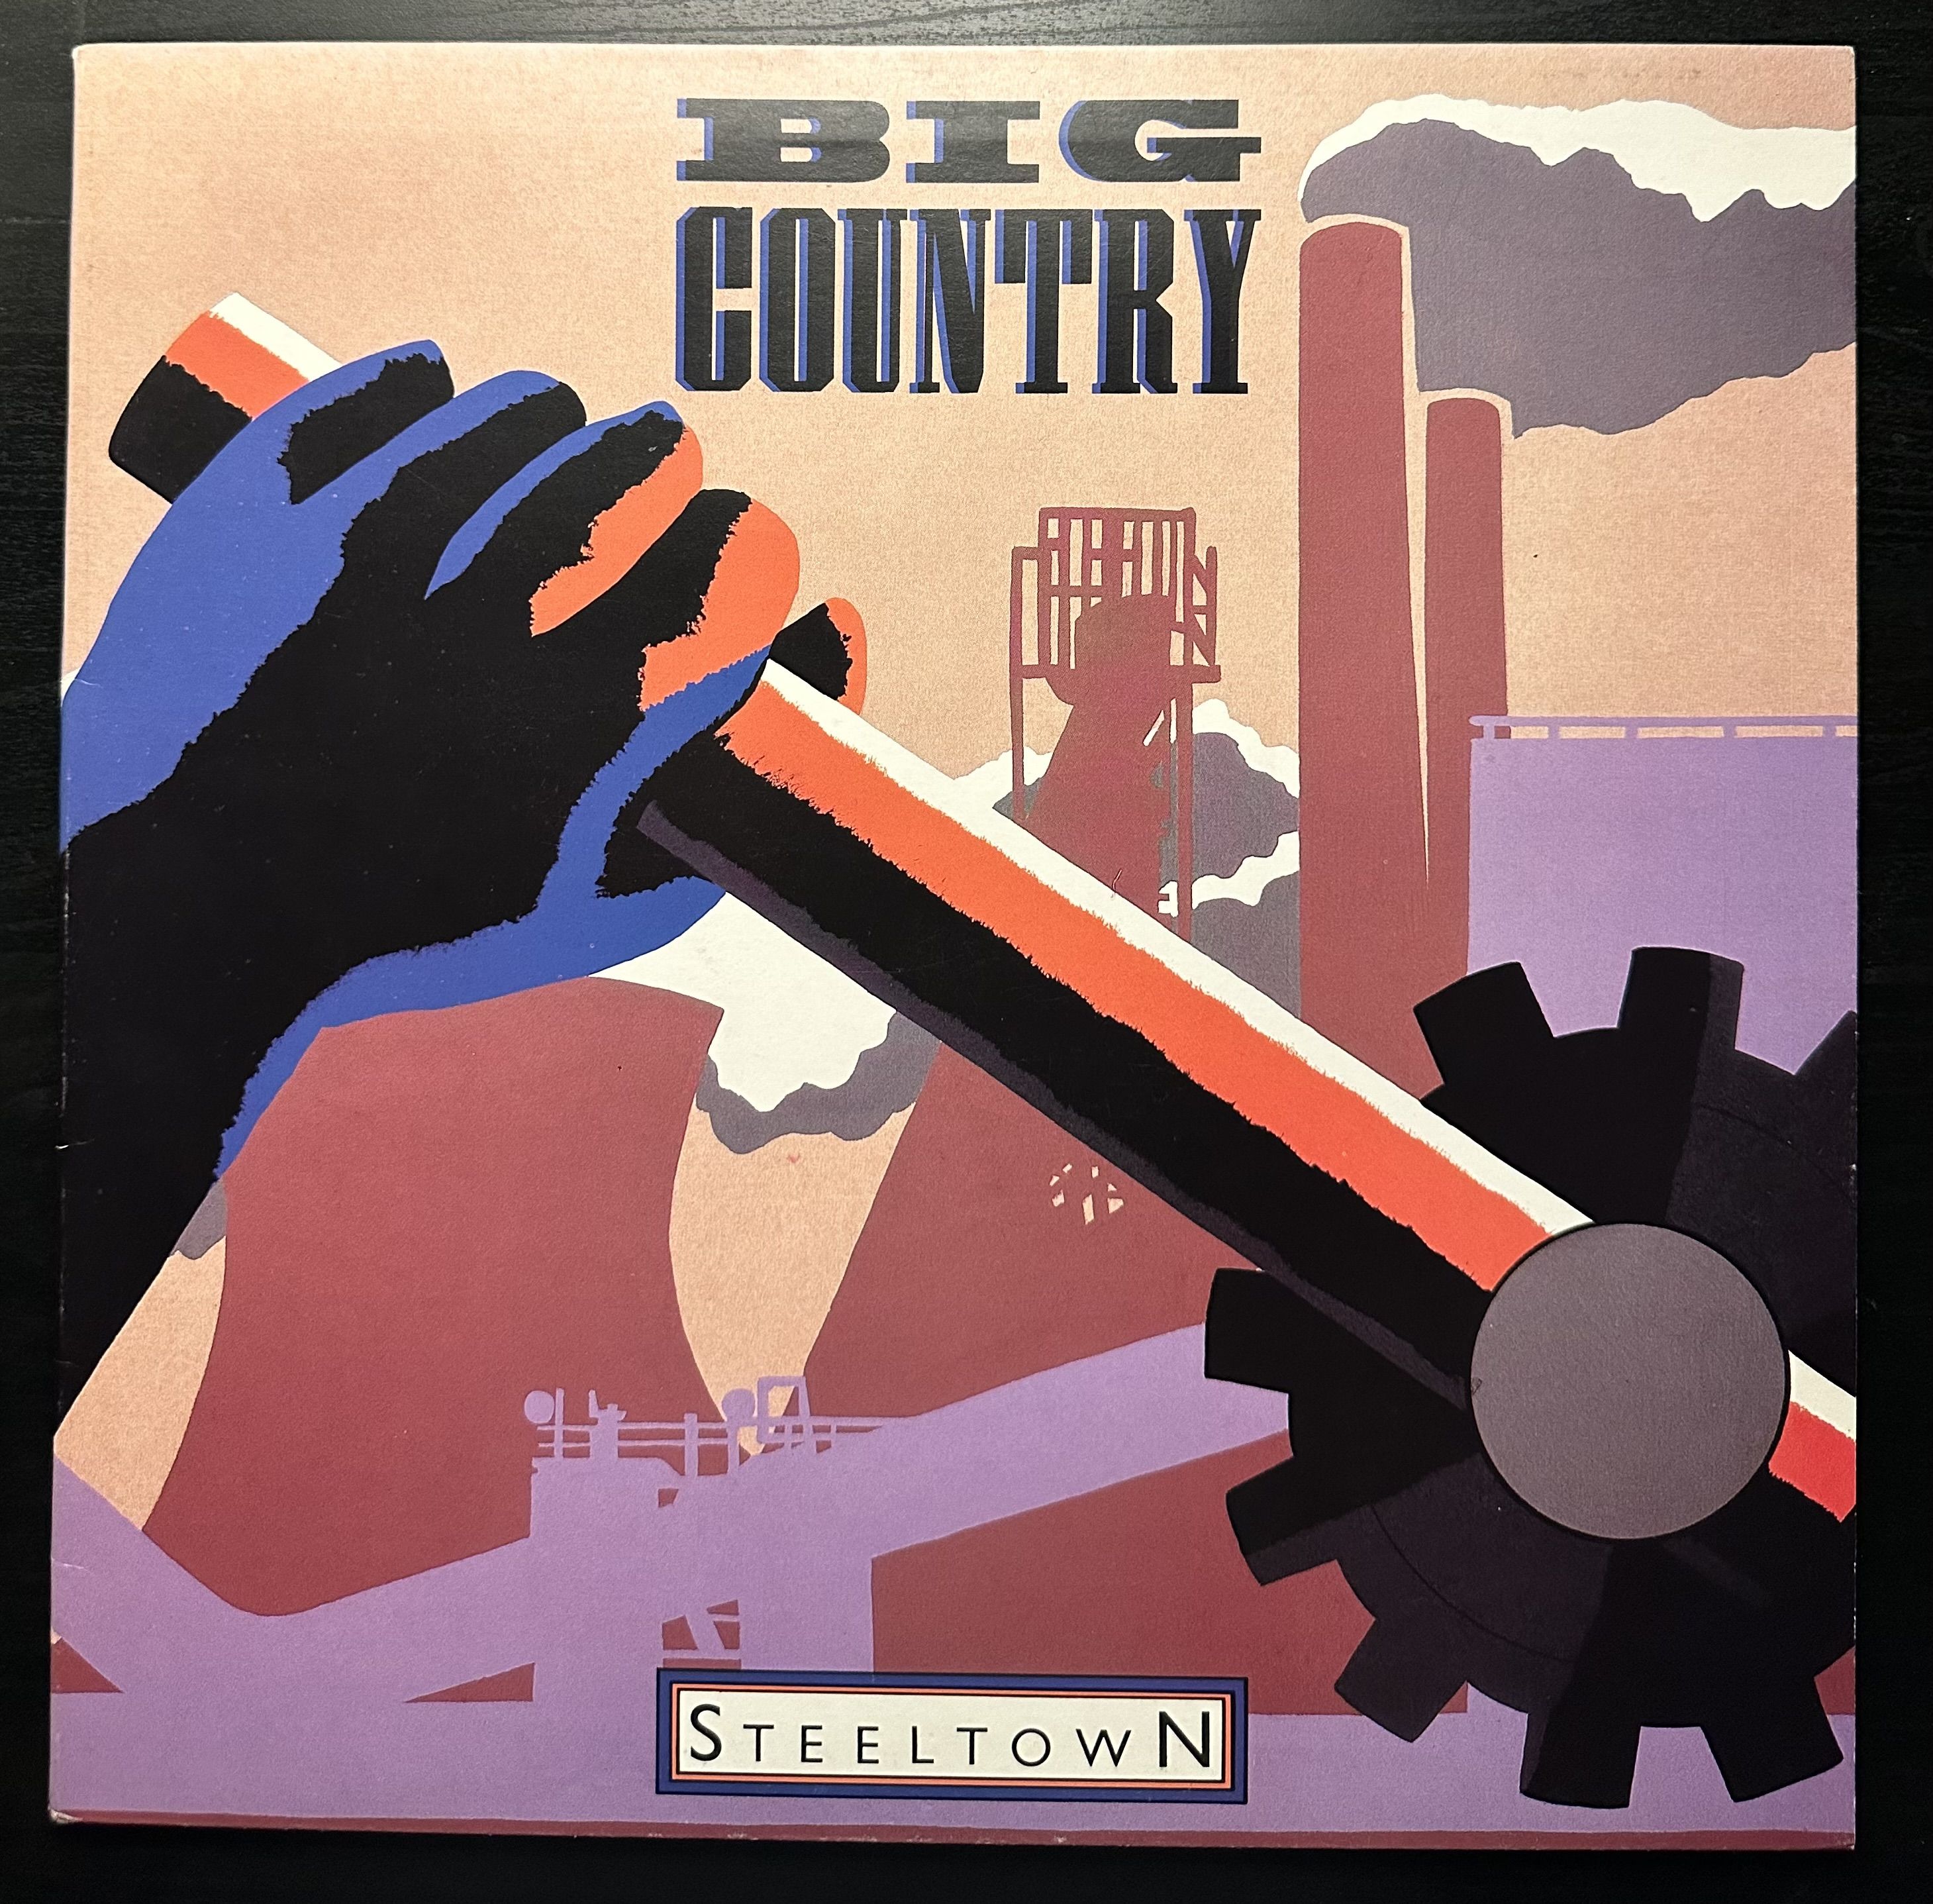 Huge country. Steeltown. Big Country. Big Country Peace in our time пластинка. Big Country "Crossing (2lp)".